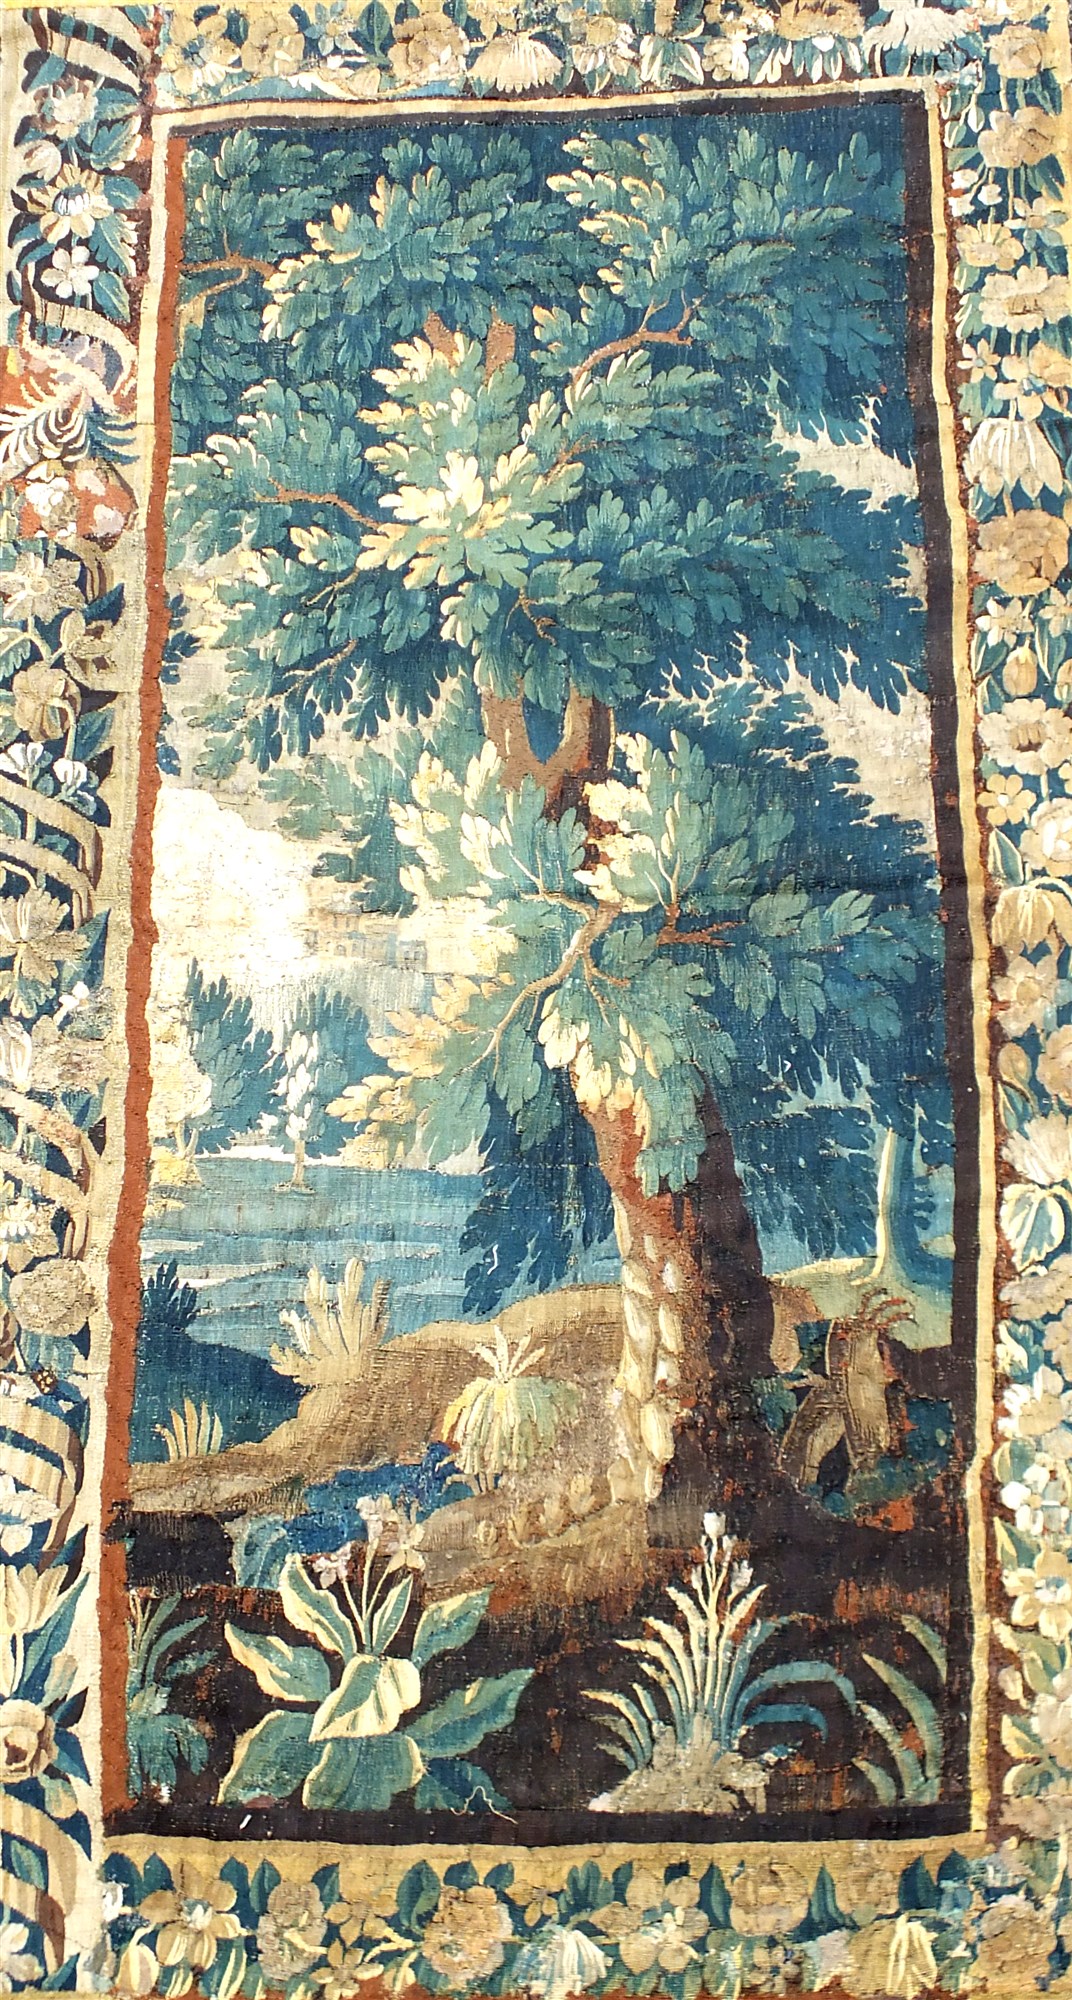 A French verdure tapestry, late 17th century